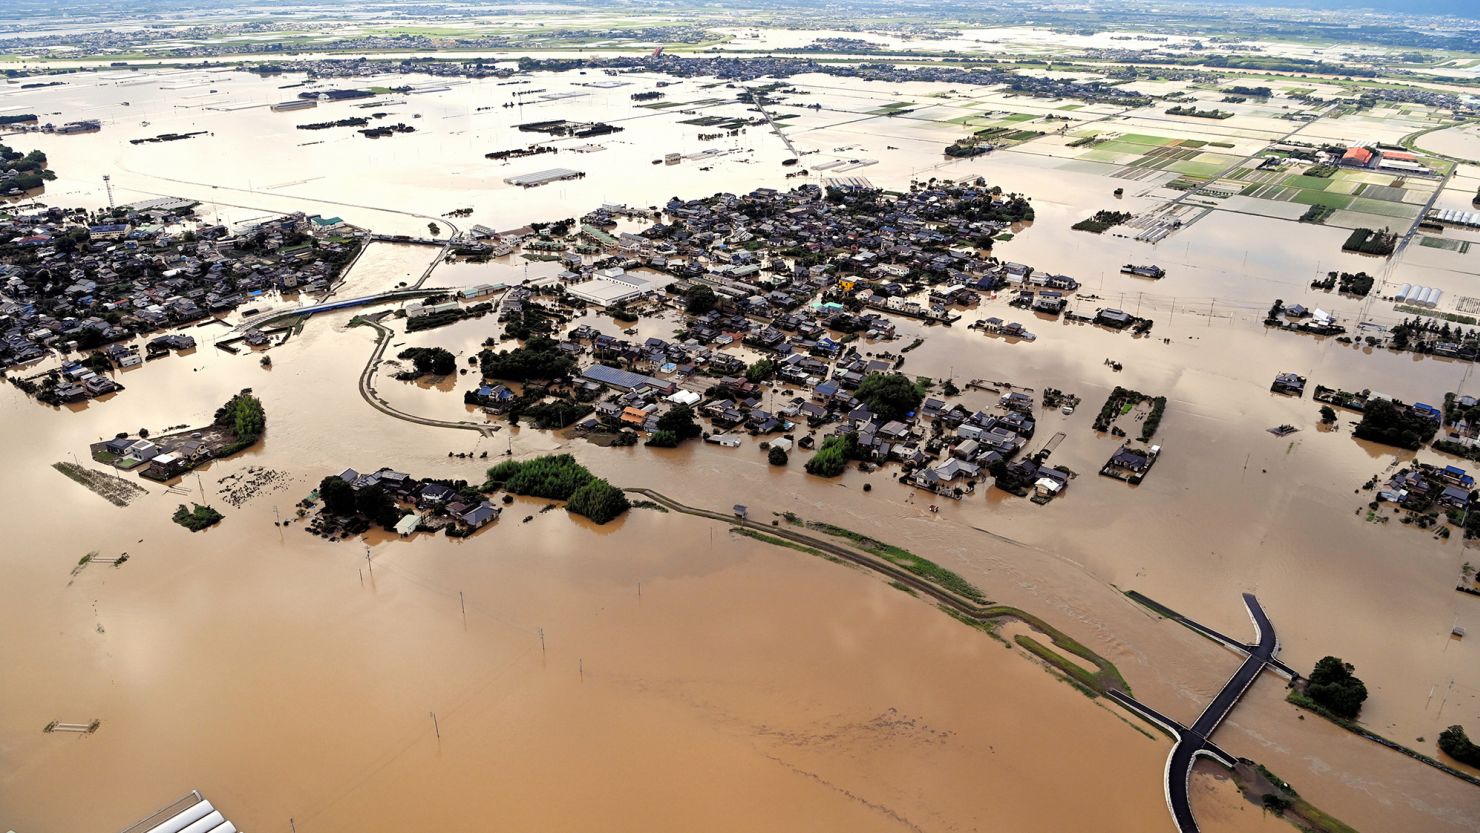 Ohashi Elementary School and the surrounding area are inundated after the Kosegawa River flooded following torrential rain on July 10, 2023 in Kurume, Fukuoka, Japan.